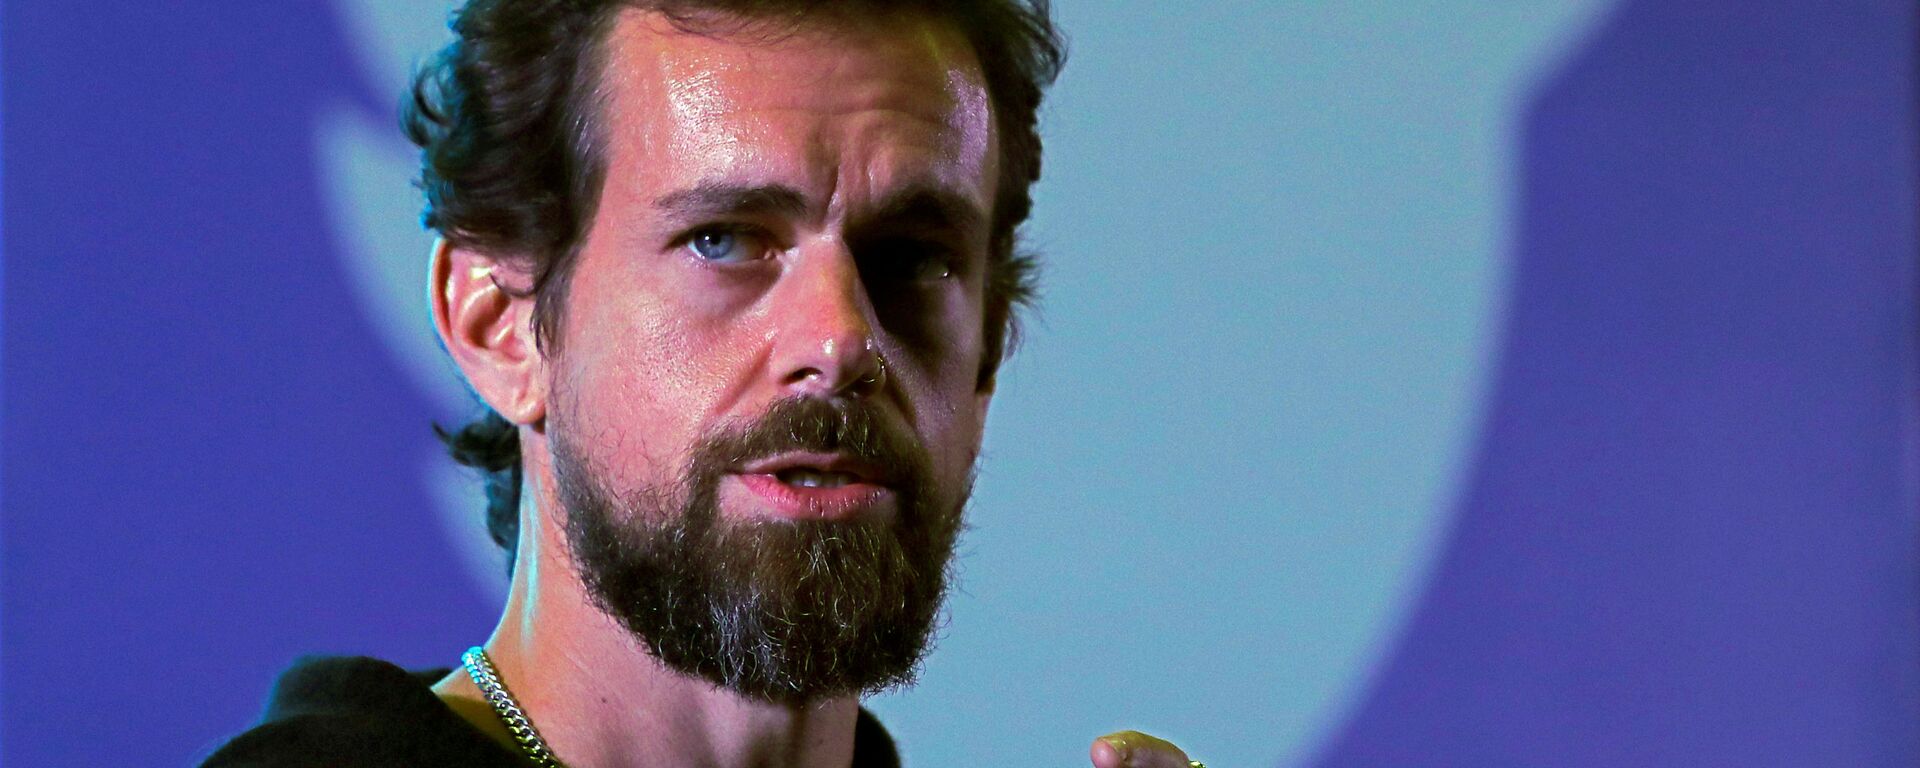 Twitter CEO Jack Dorsey addresses students during a town hall at the Indian Institute of Technology (IIT) in New Delhi, India, November 12, 2018 - Sputnik International, 1920, 16.04.2022